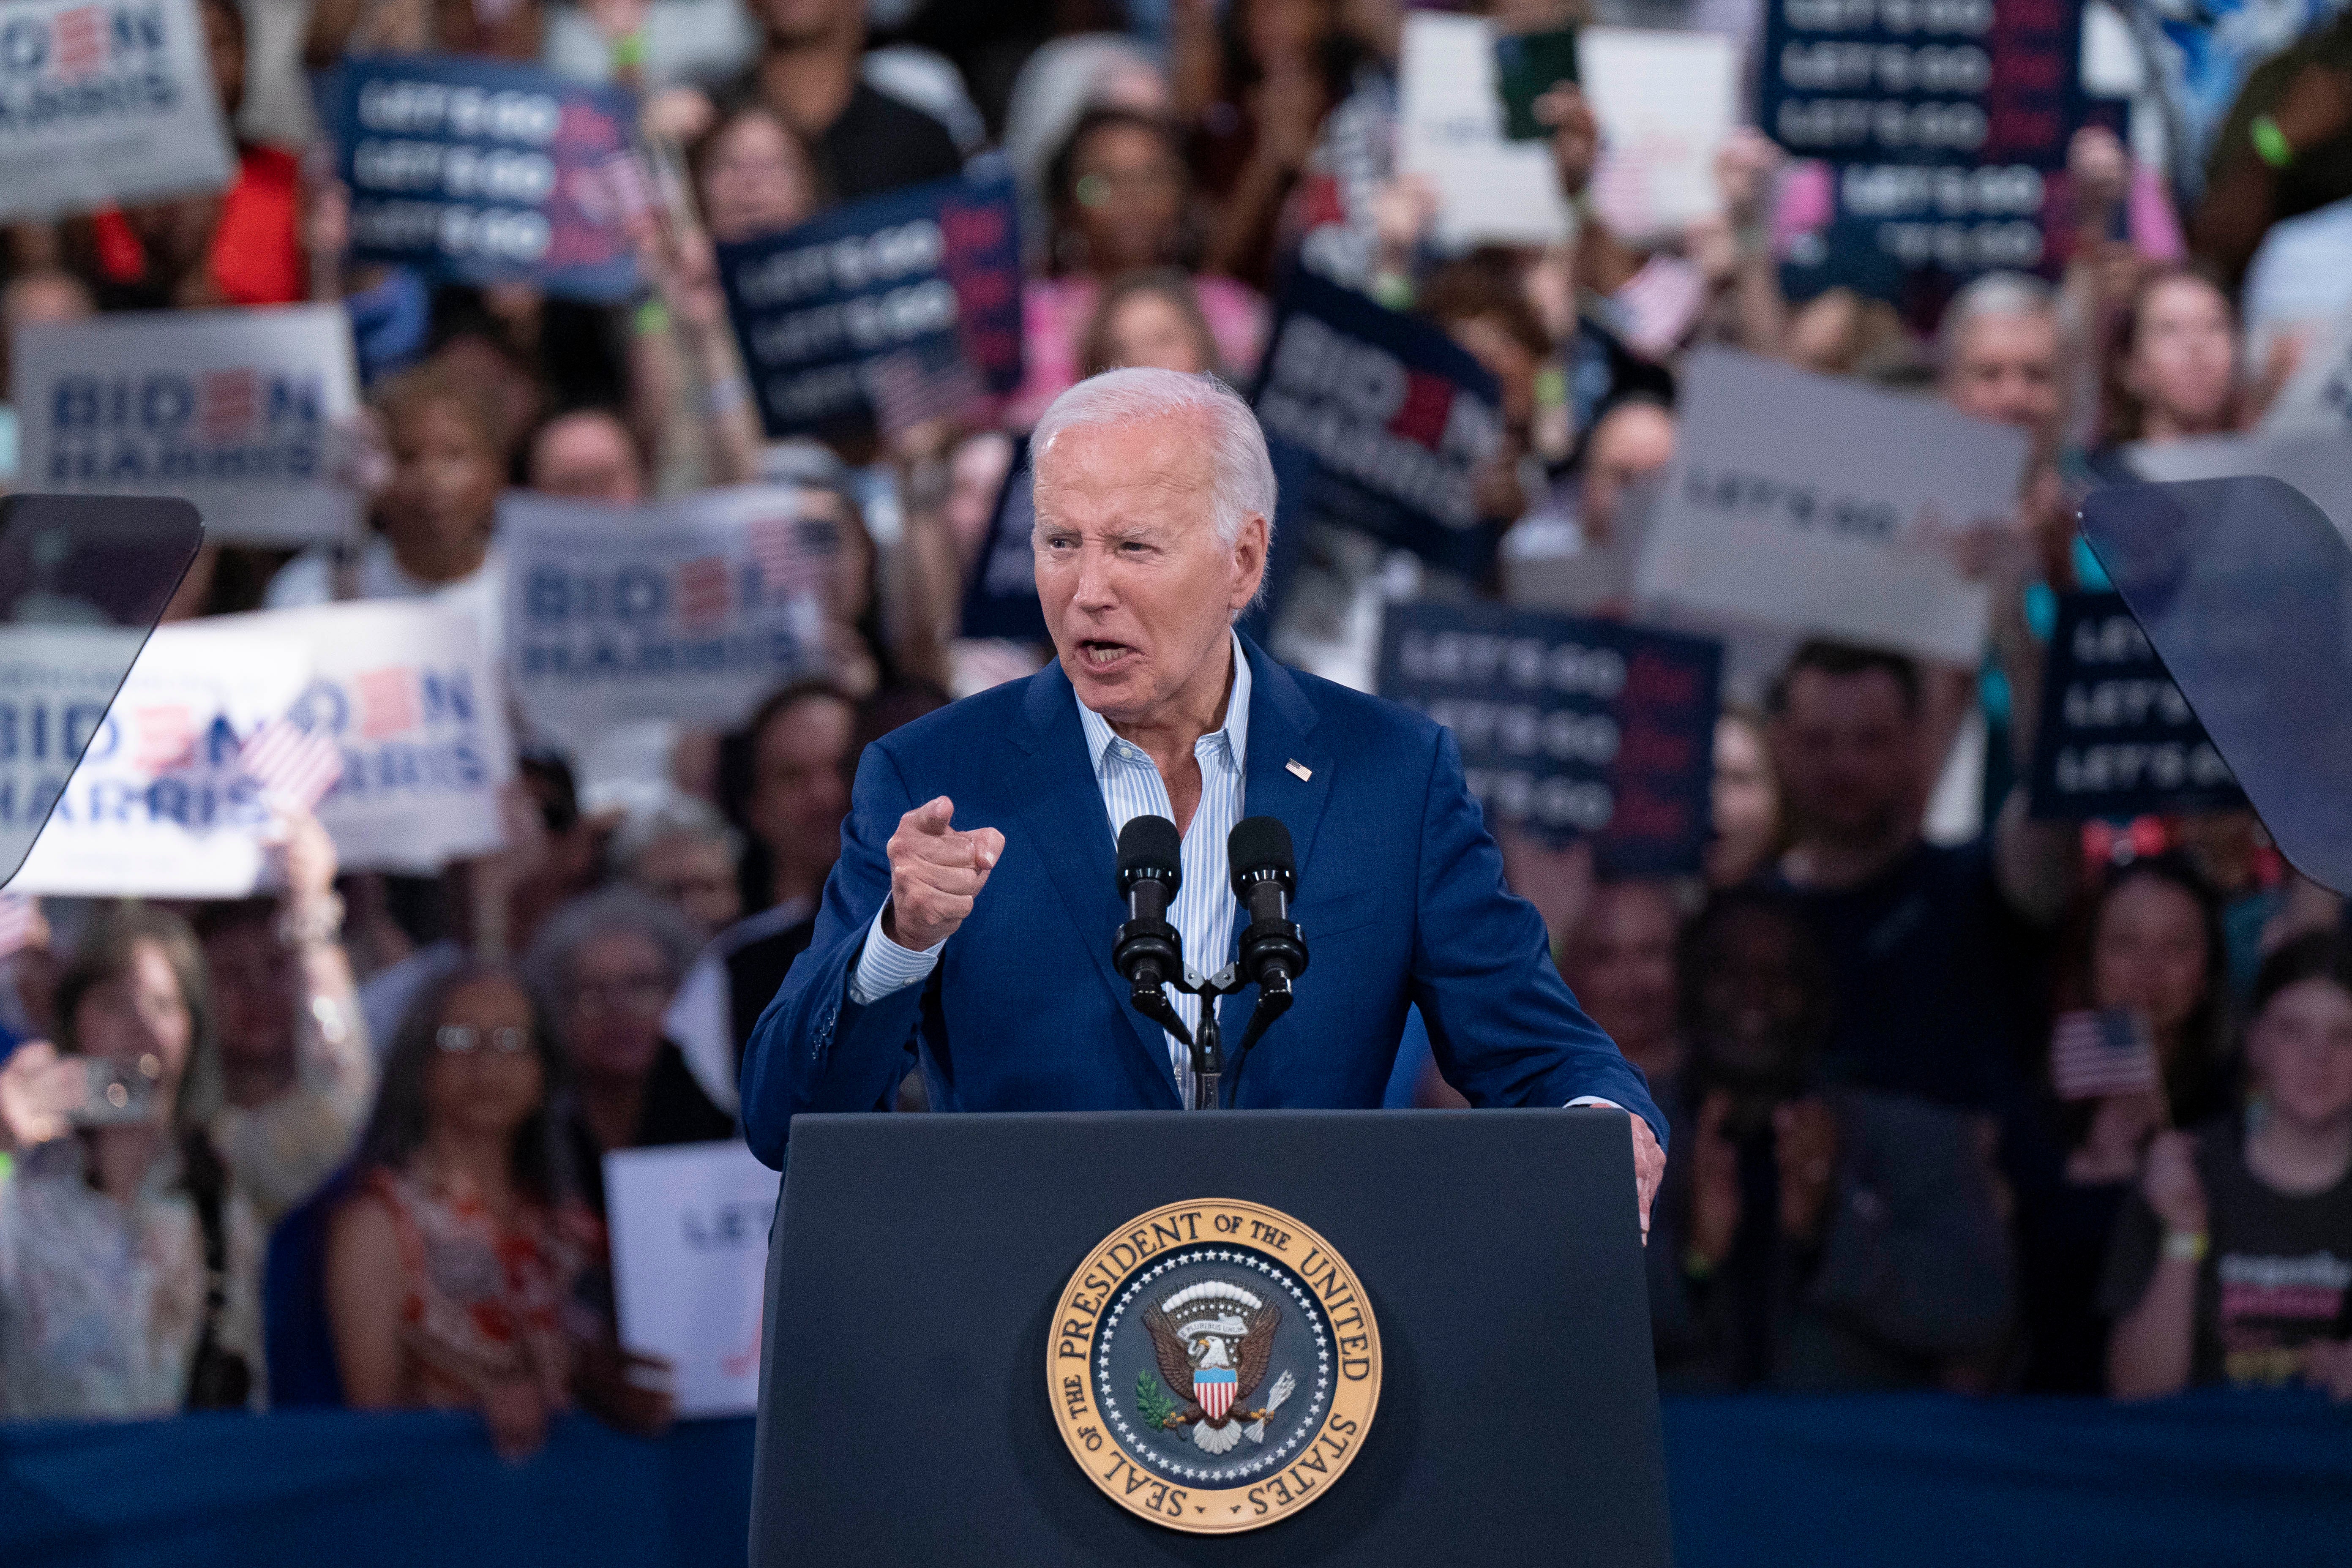 President Joe Biden is now being used in attacks against vulnerable Democrats.